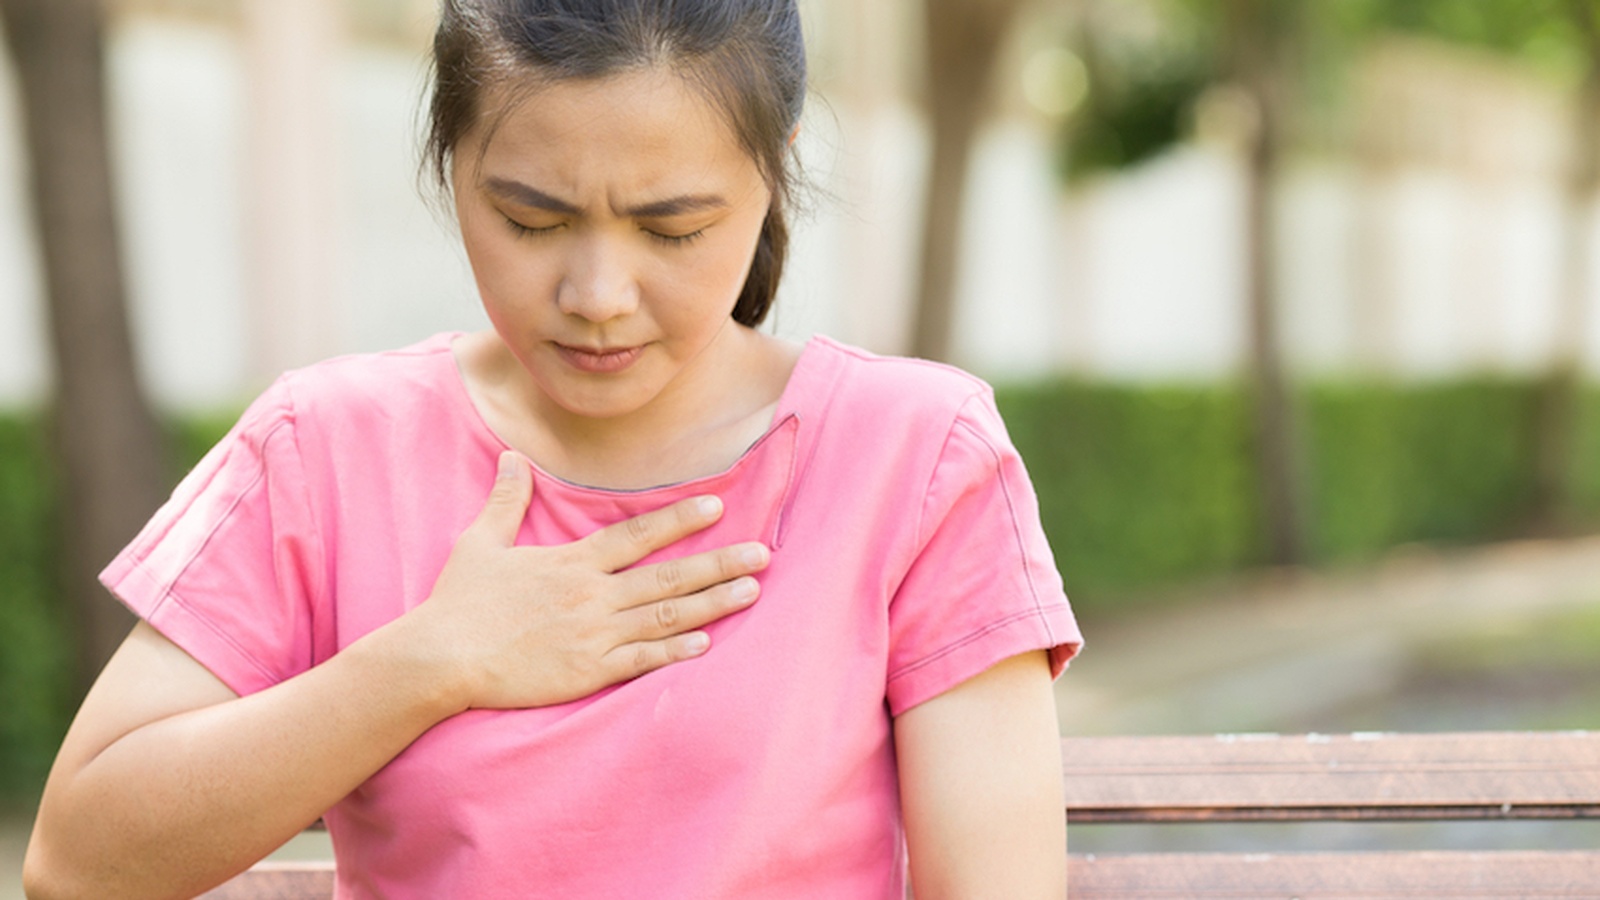 7 Natural Ways to Remedy Heartburn and Indigestion Without Nasty Antacids